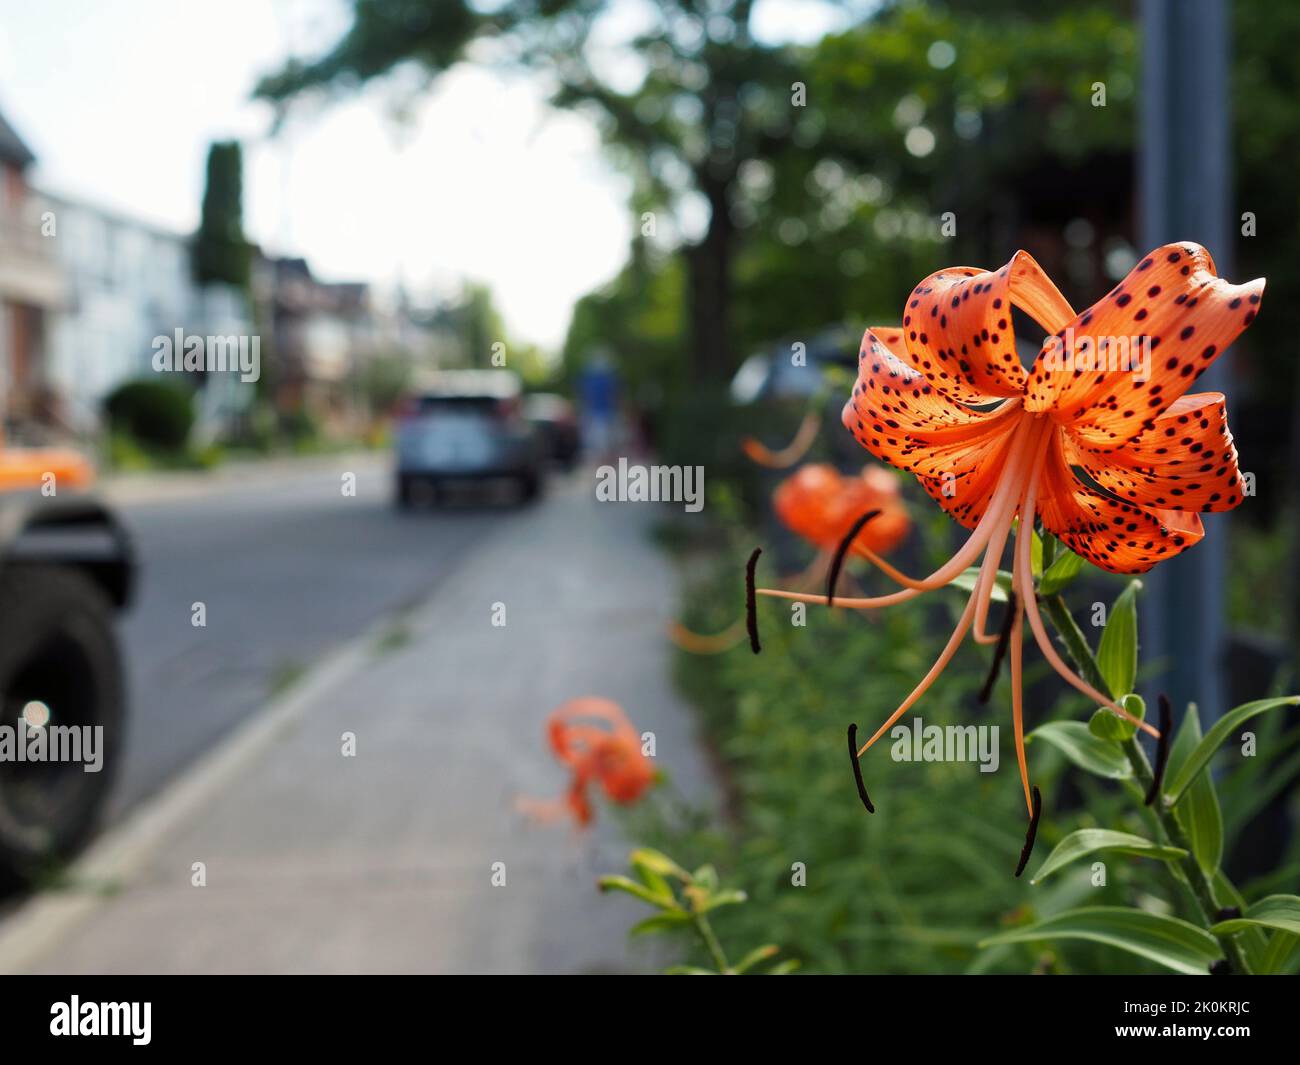 Bright orange tiger lily (Lilium lancifolium) by the side of the pavement in Ottawa, ON, Canada. Stock Photo